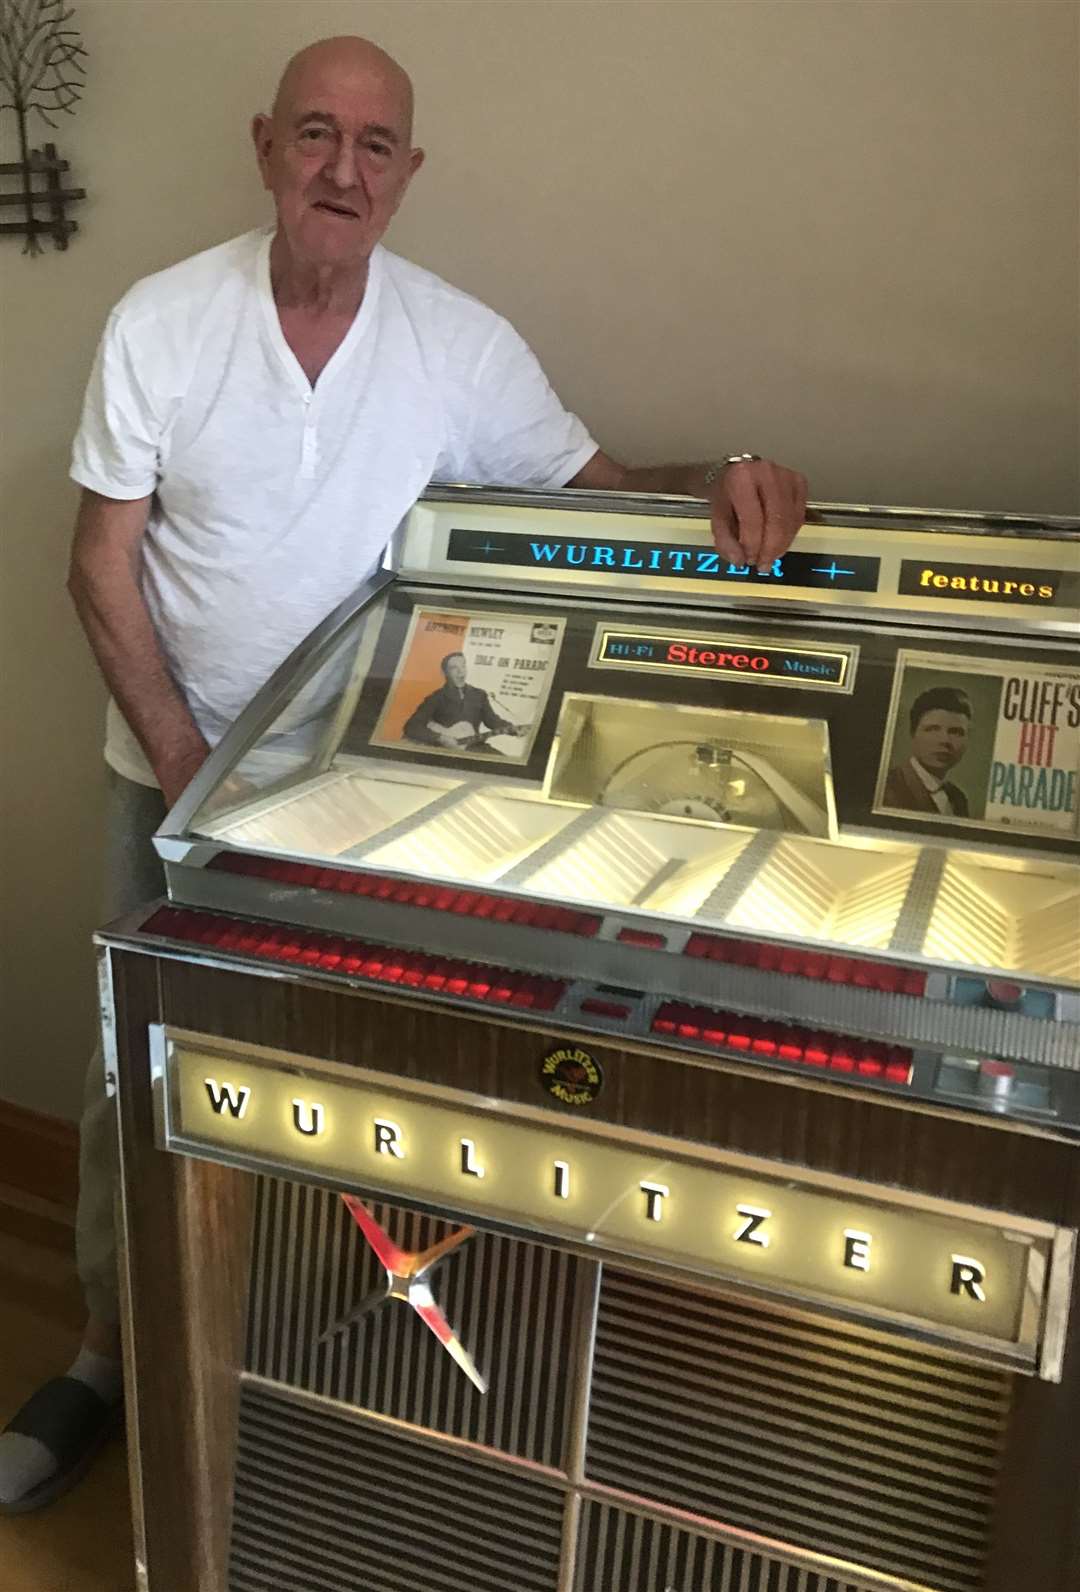 At home with his jukebox